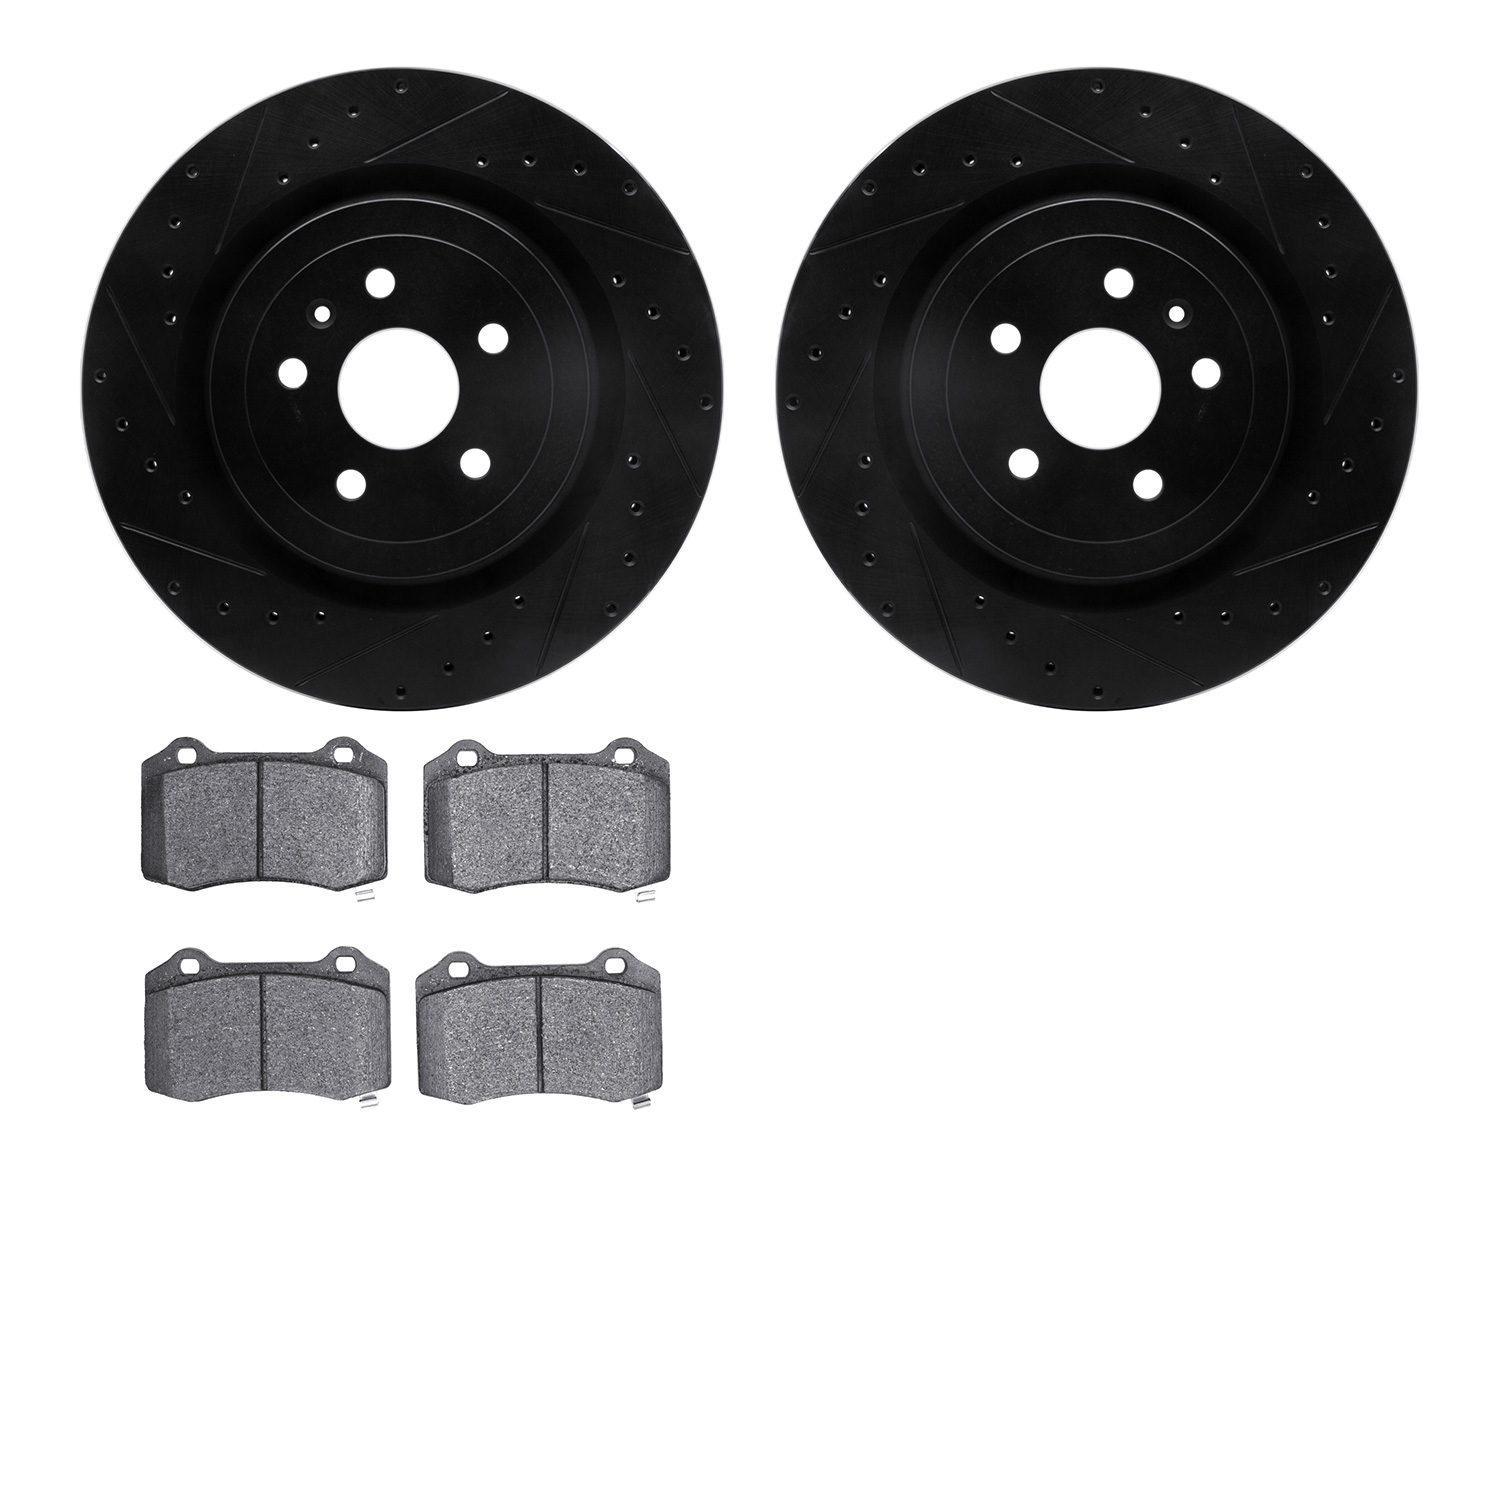 8302-47054 Drilled/Slotted Brake Rotors with 3000-Series Ceramic Brake Pads Kit [Black], Fits Select GM, Position: Rear